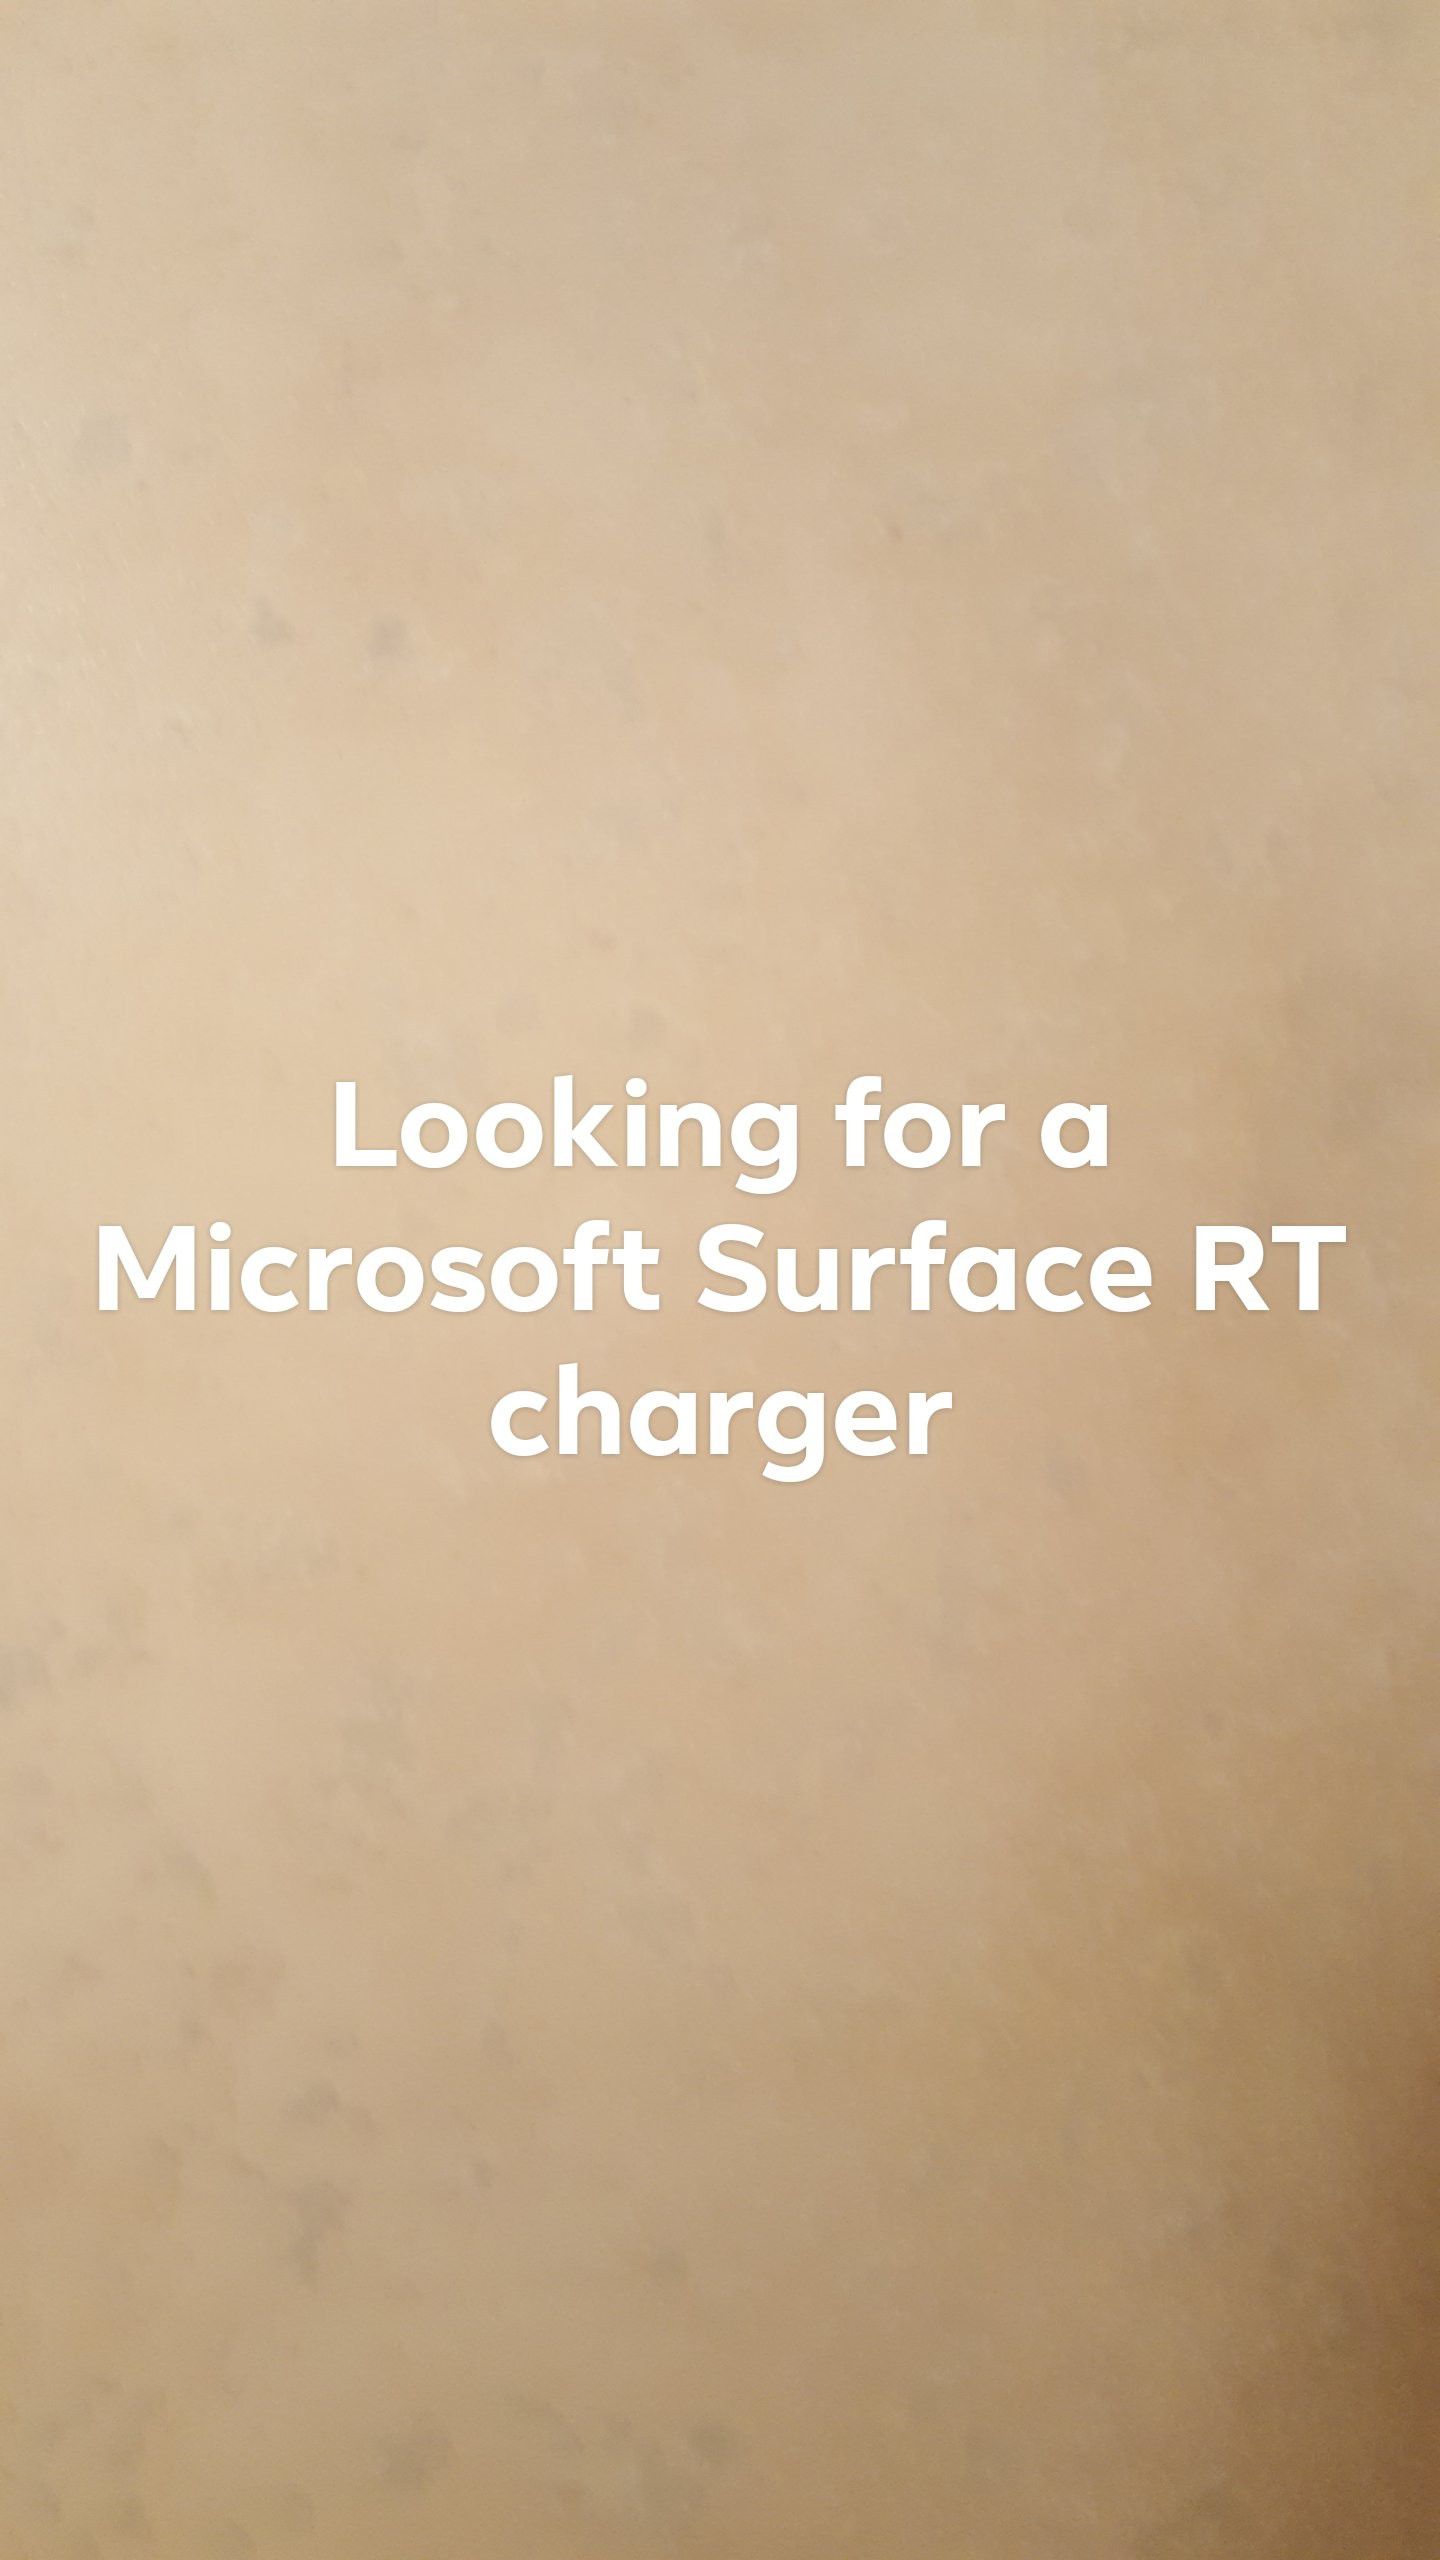 Looking for Microsoft Surface RT tablet charger